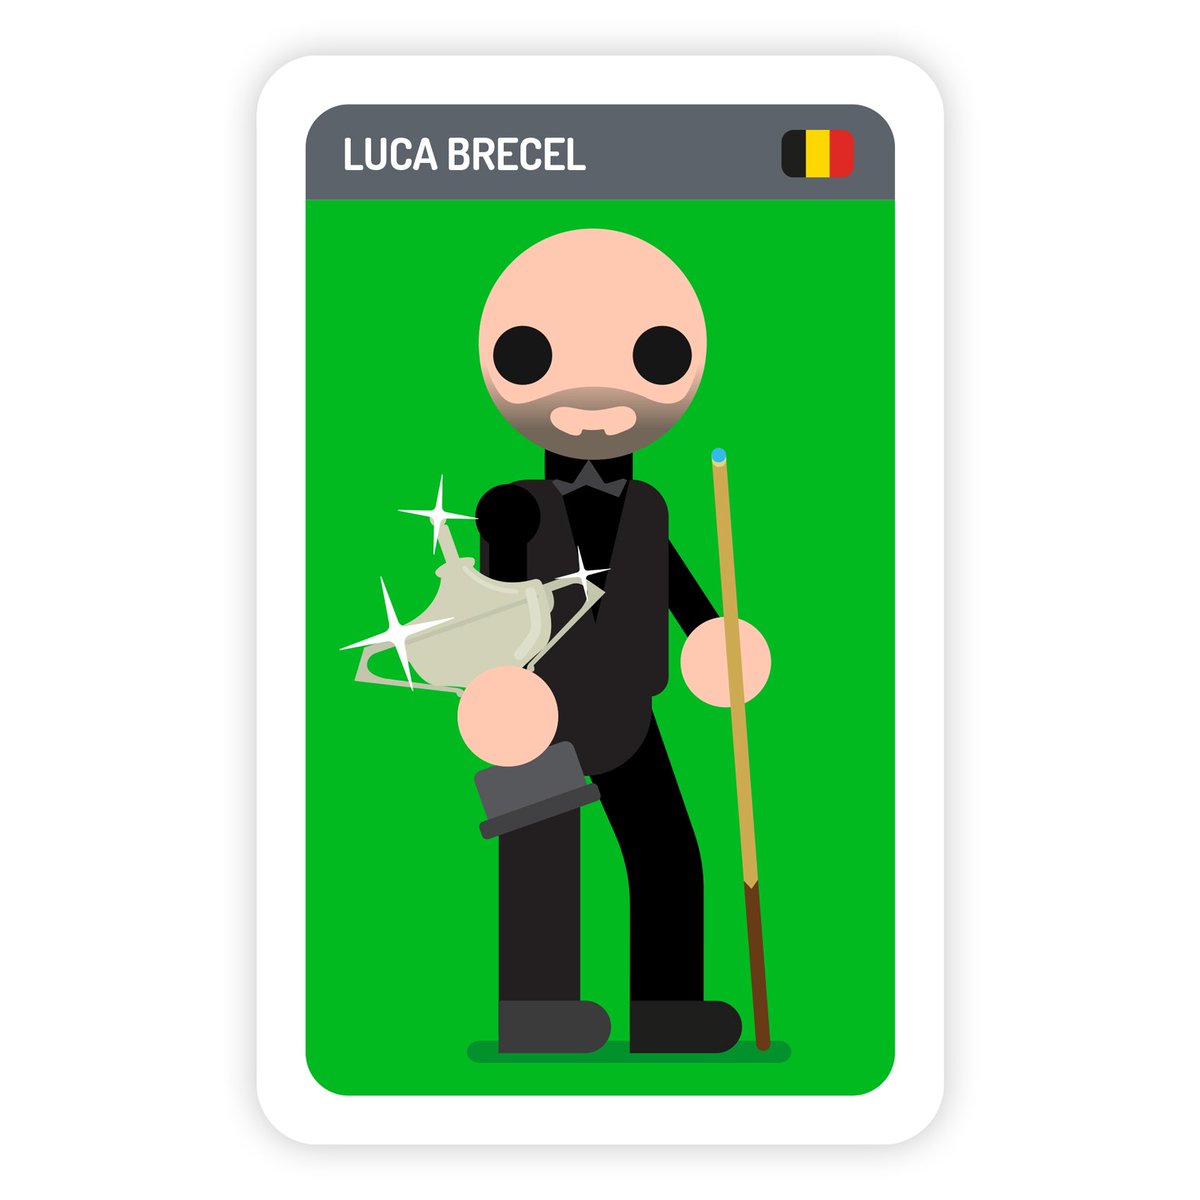 Congratulations Luca Brecel 👏

World Snooker Champion 2023 🏆💚👏 Absolutely amazing performance 🤩 

#CazooWorldChampionship #WorldSnookerChampionship